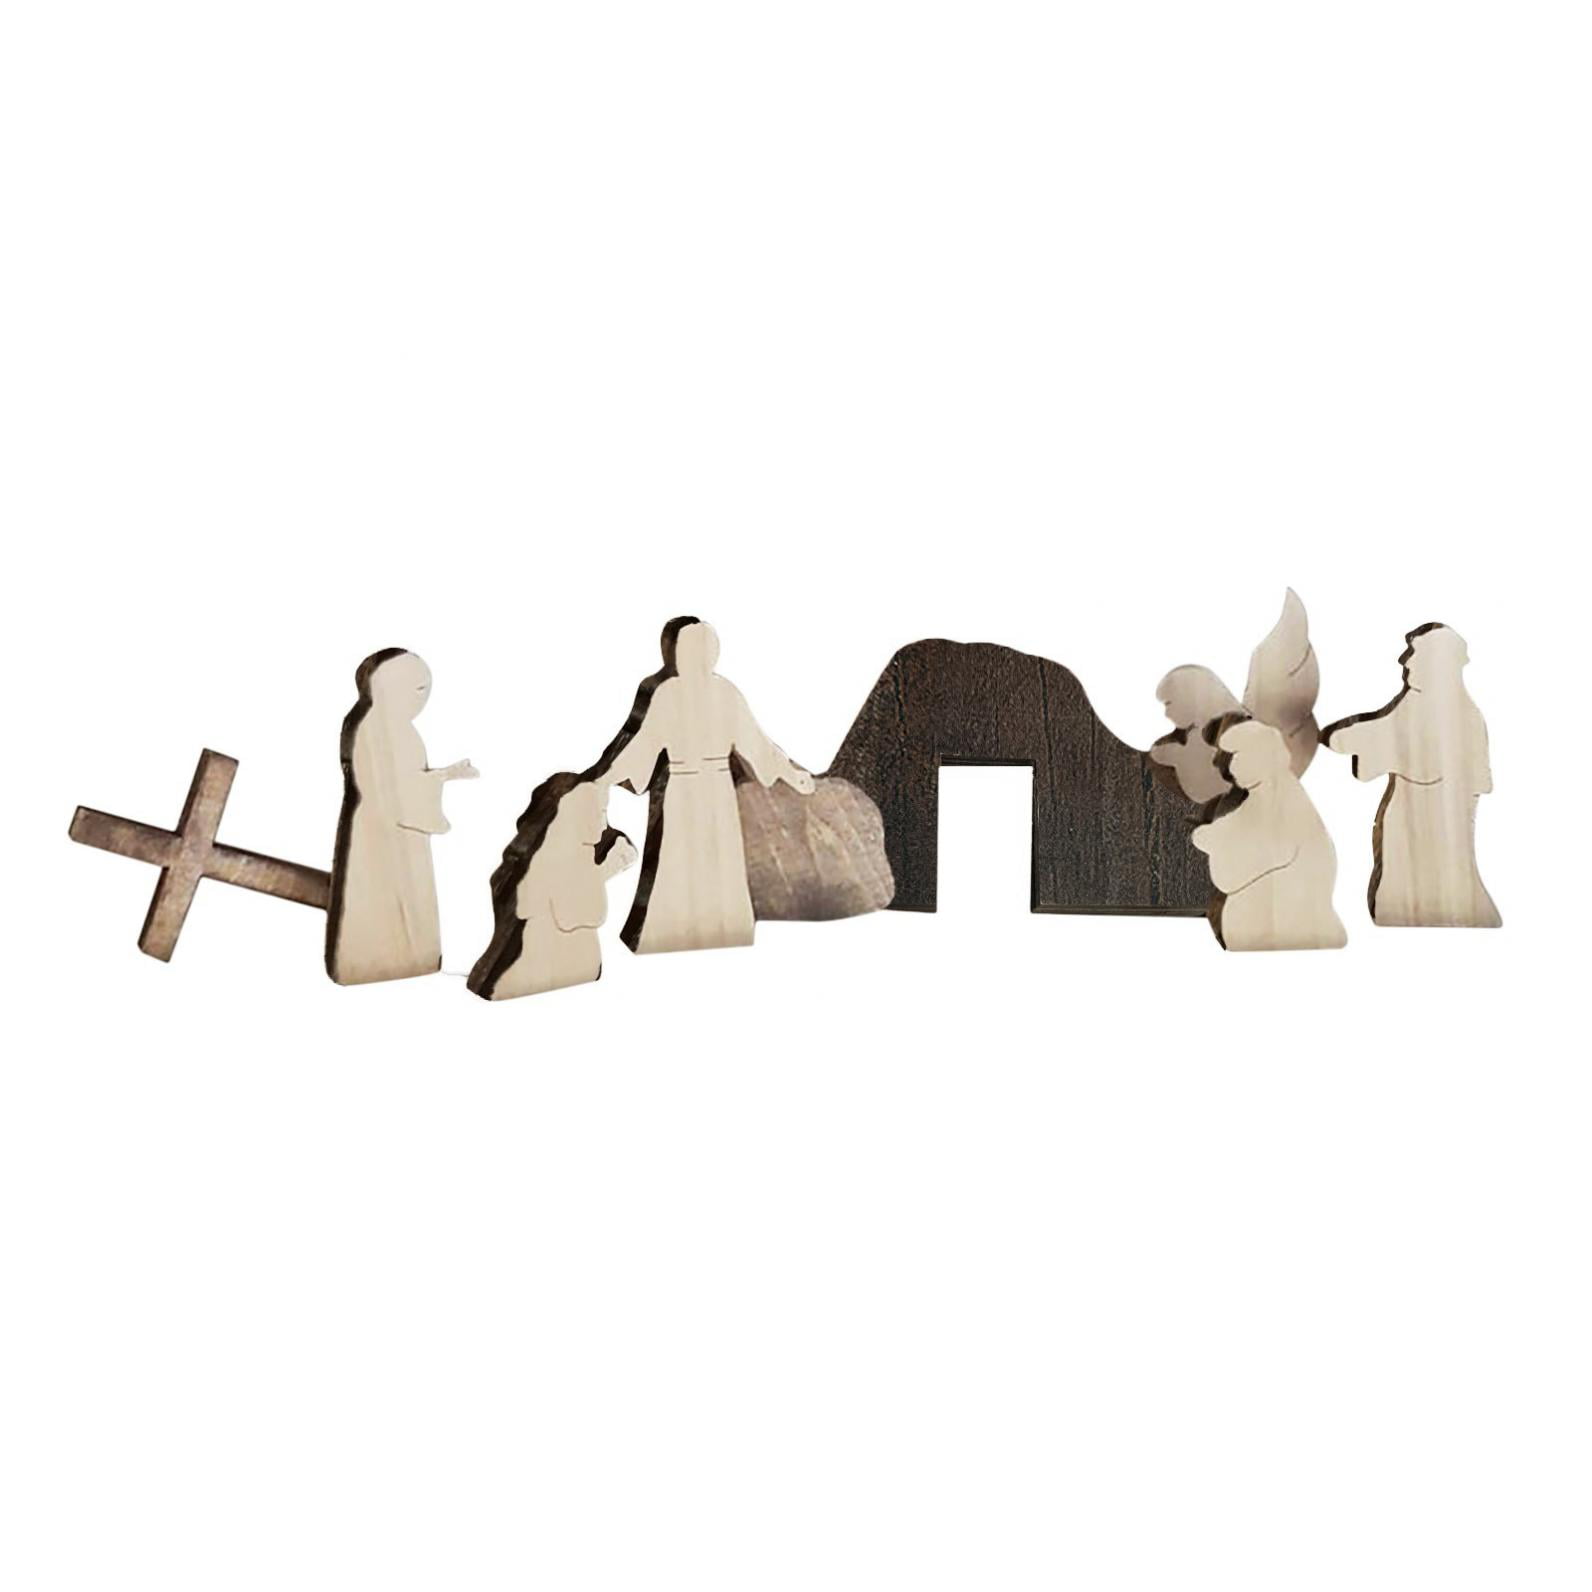 Details about   Easter Resurrection Scene Wooden Decor Cross Home Ornament Wooden Nativity Hot 